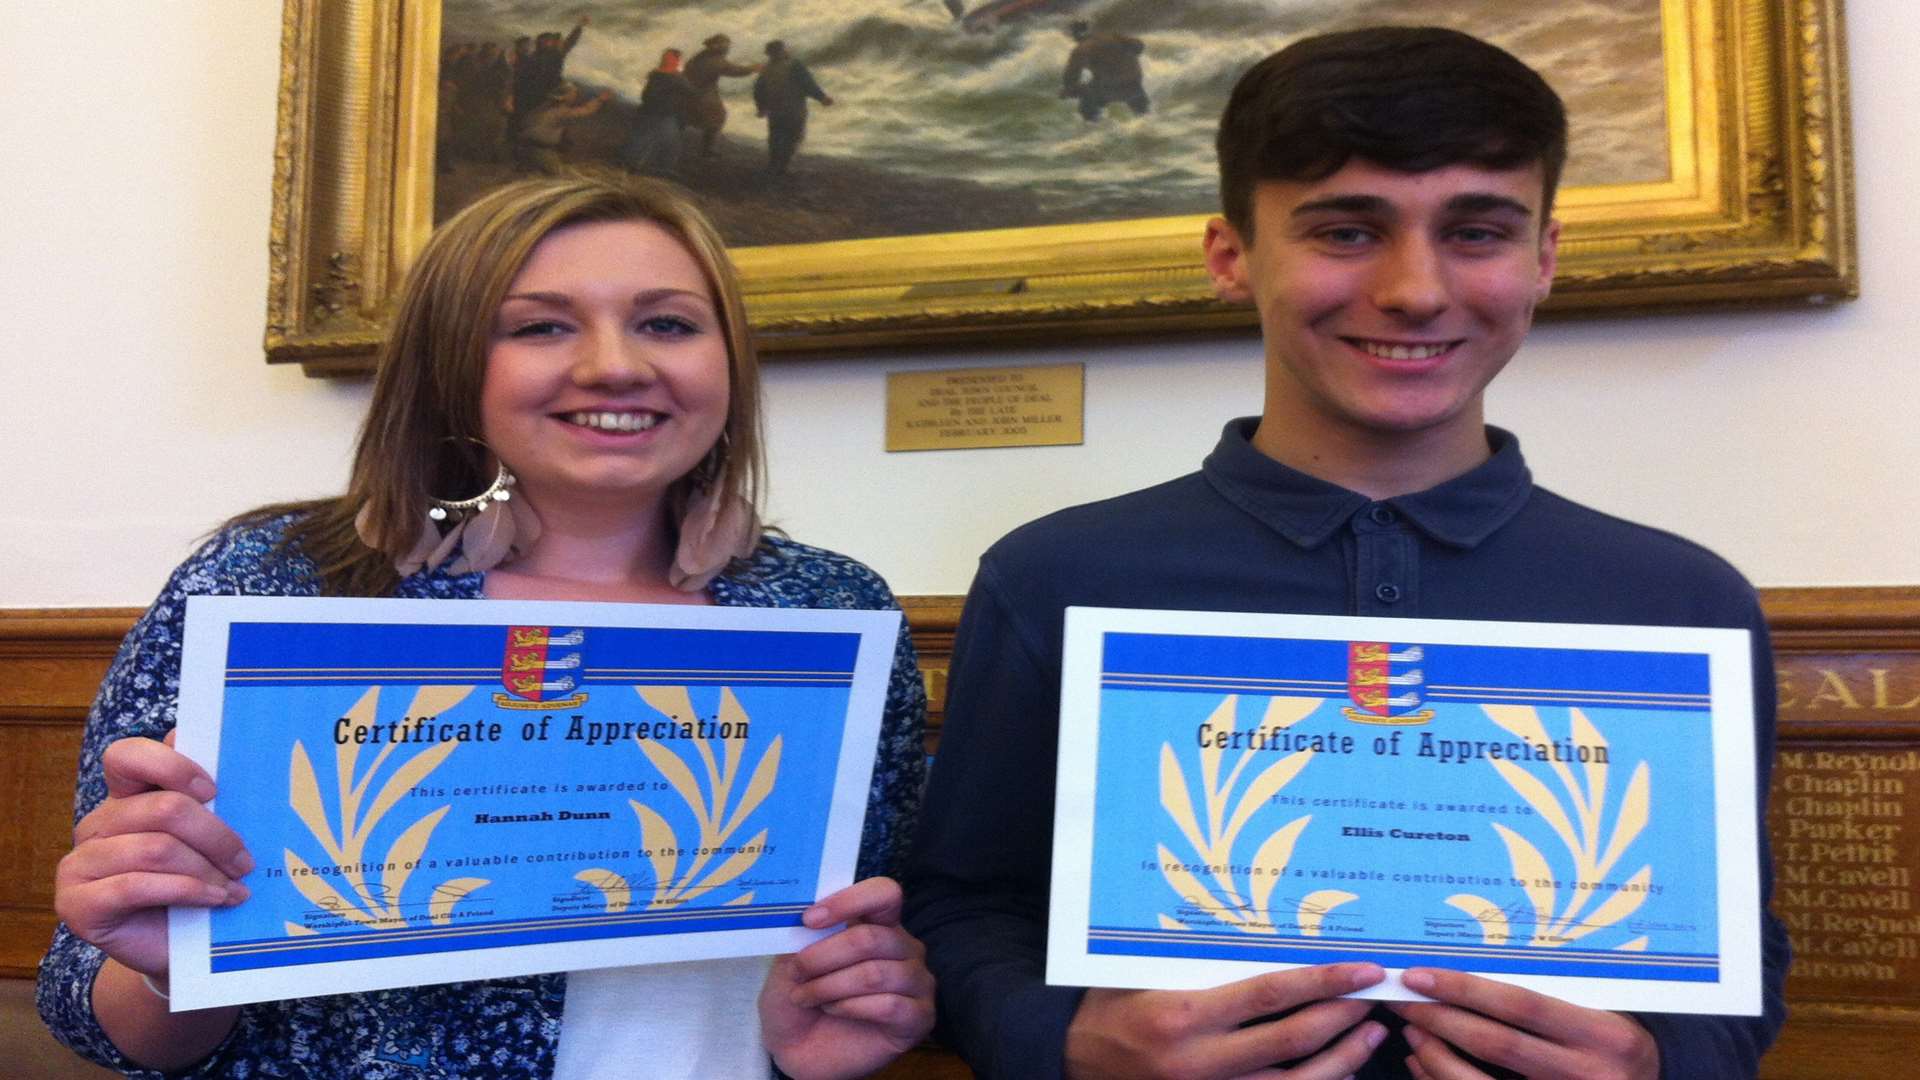 Hannah Dunn and Ellis Cureton with their certificates